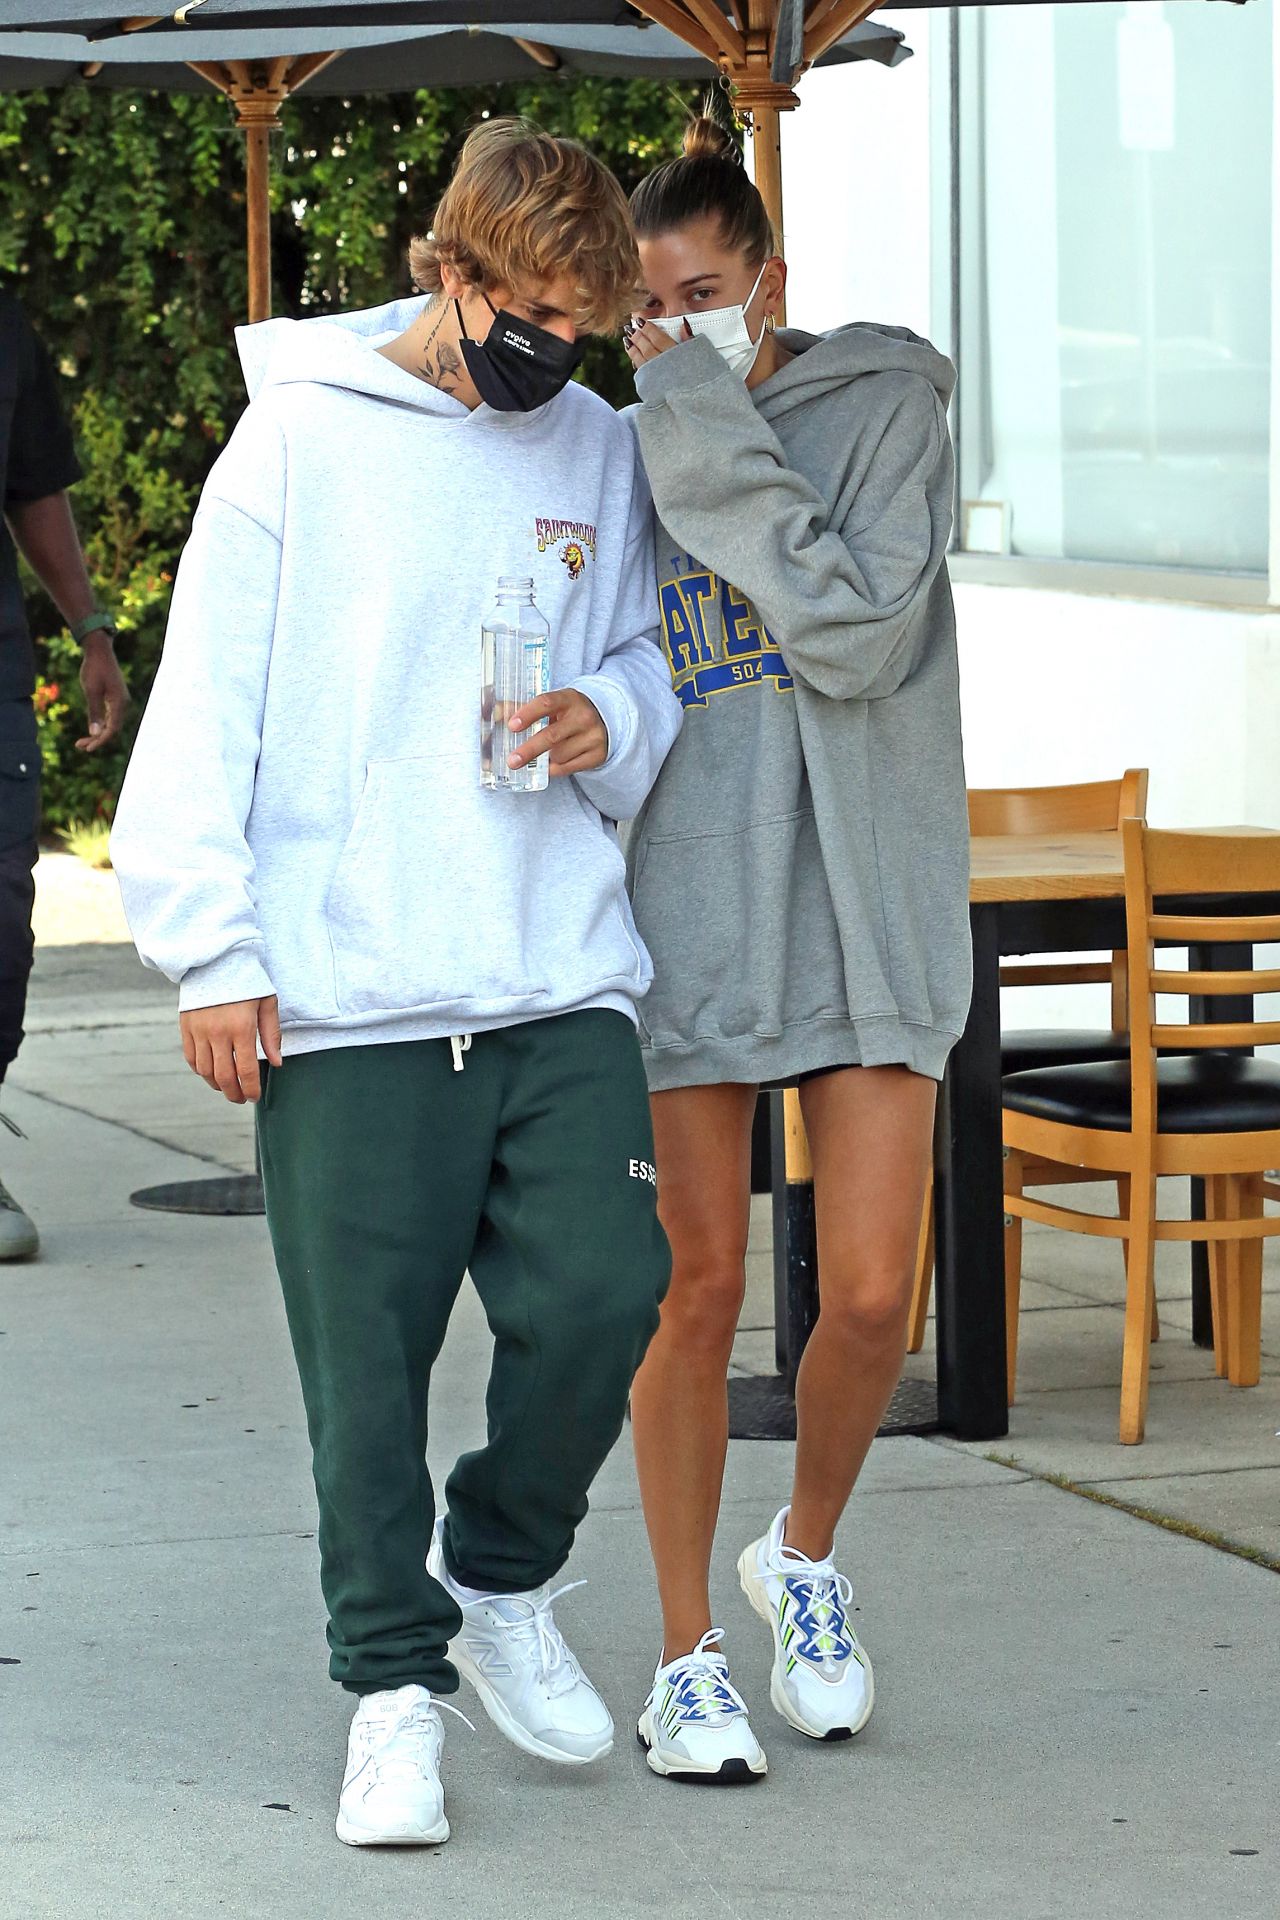 hailey-bieber-and-justin-bieber-out-in-west-hollywood-09-23-2020-15.jpg